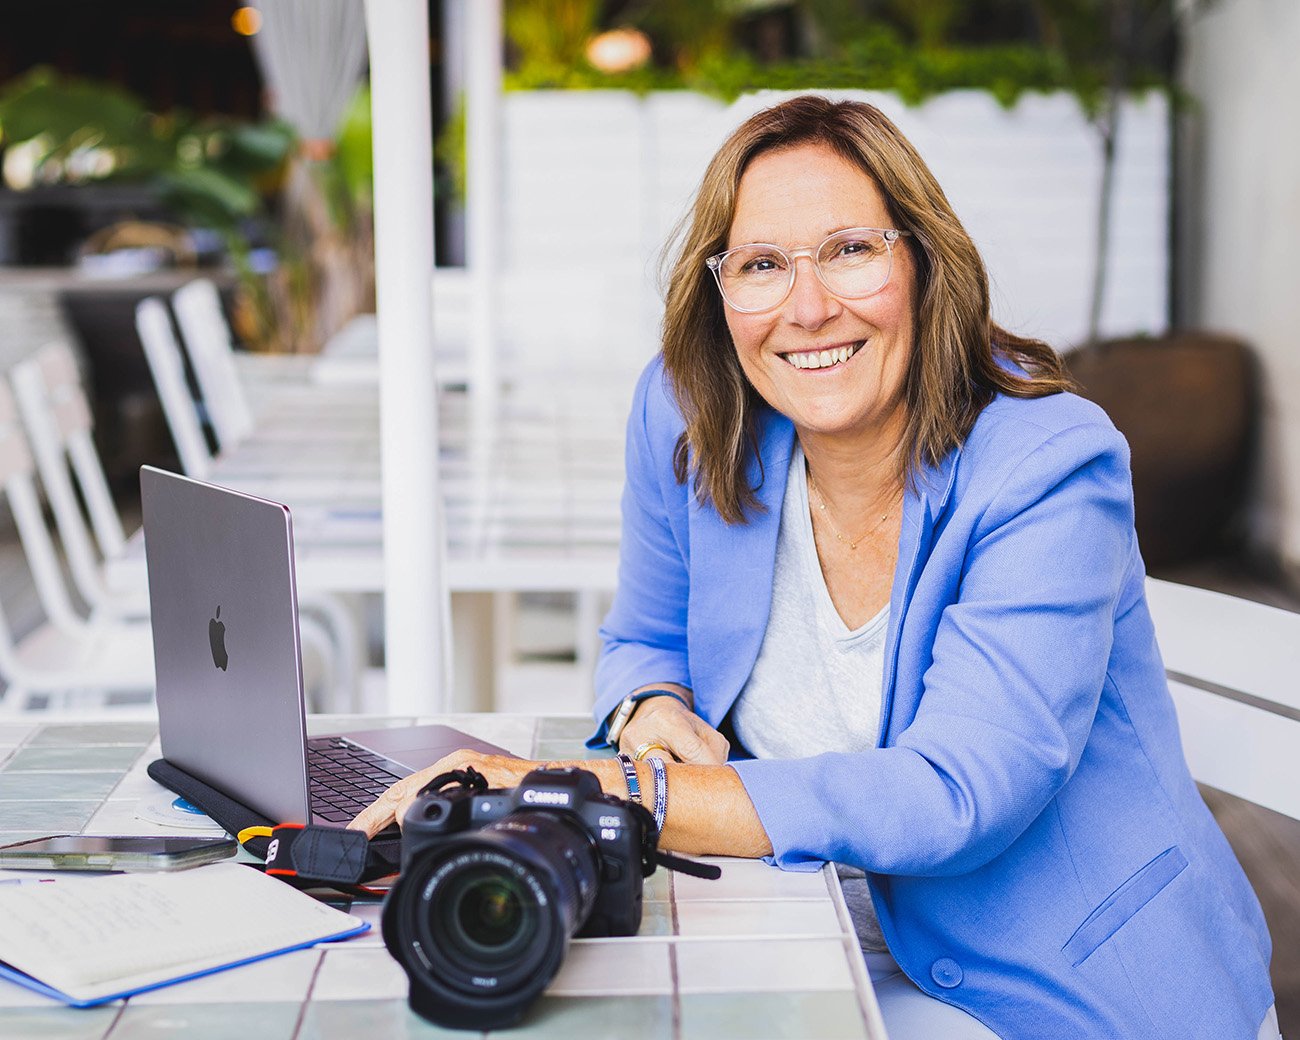 Smiling female photographer seated at table with laptop camera